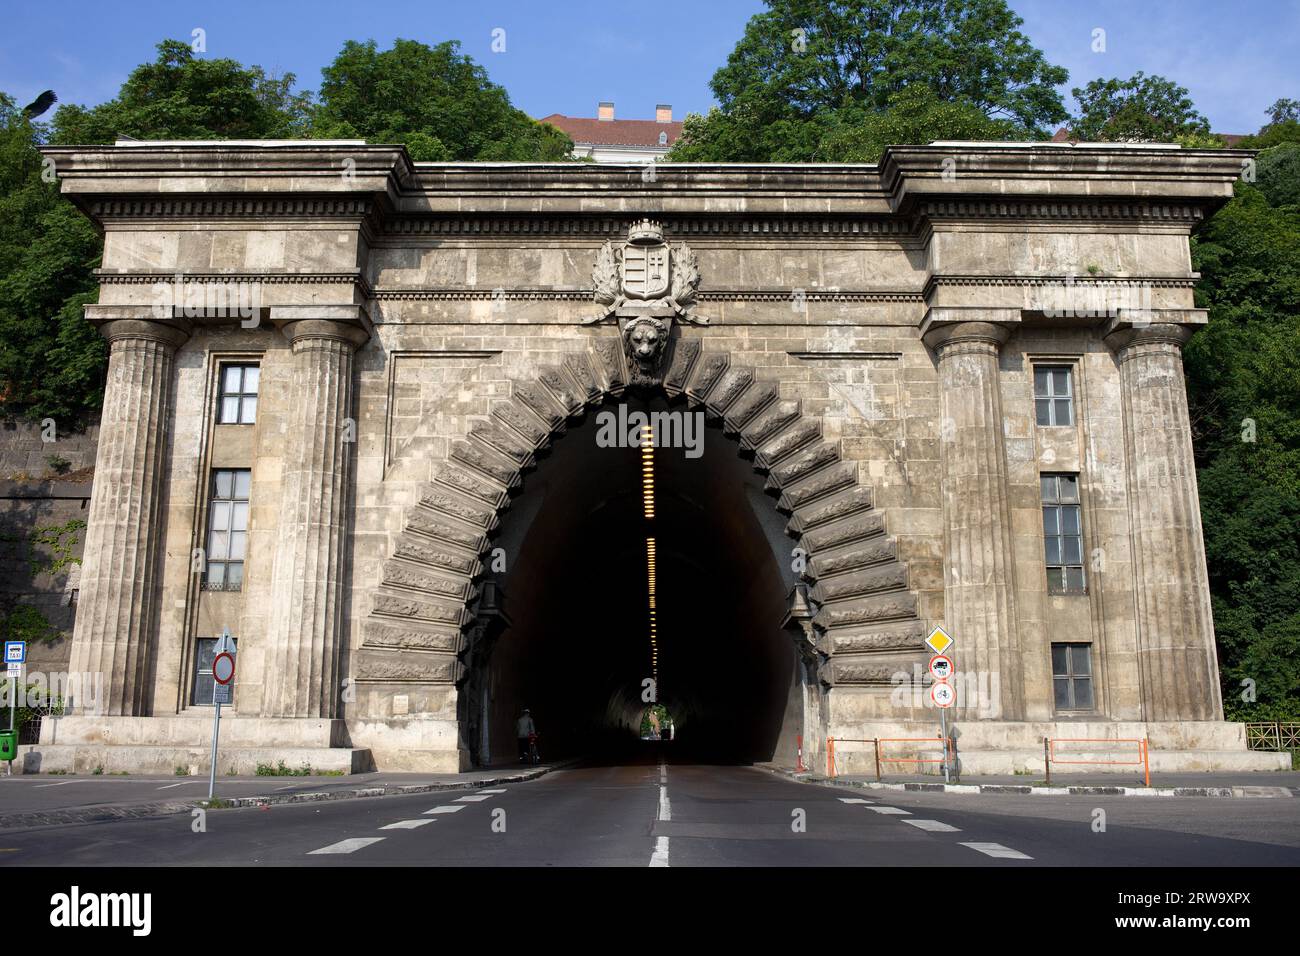 Buda Tunnel under the Castle Hill, opened in 1856, 350 meters long, located in the city of Budapest, Hungary Stock Photo